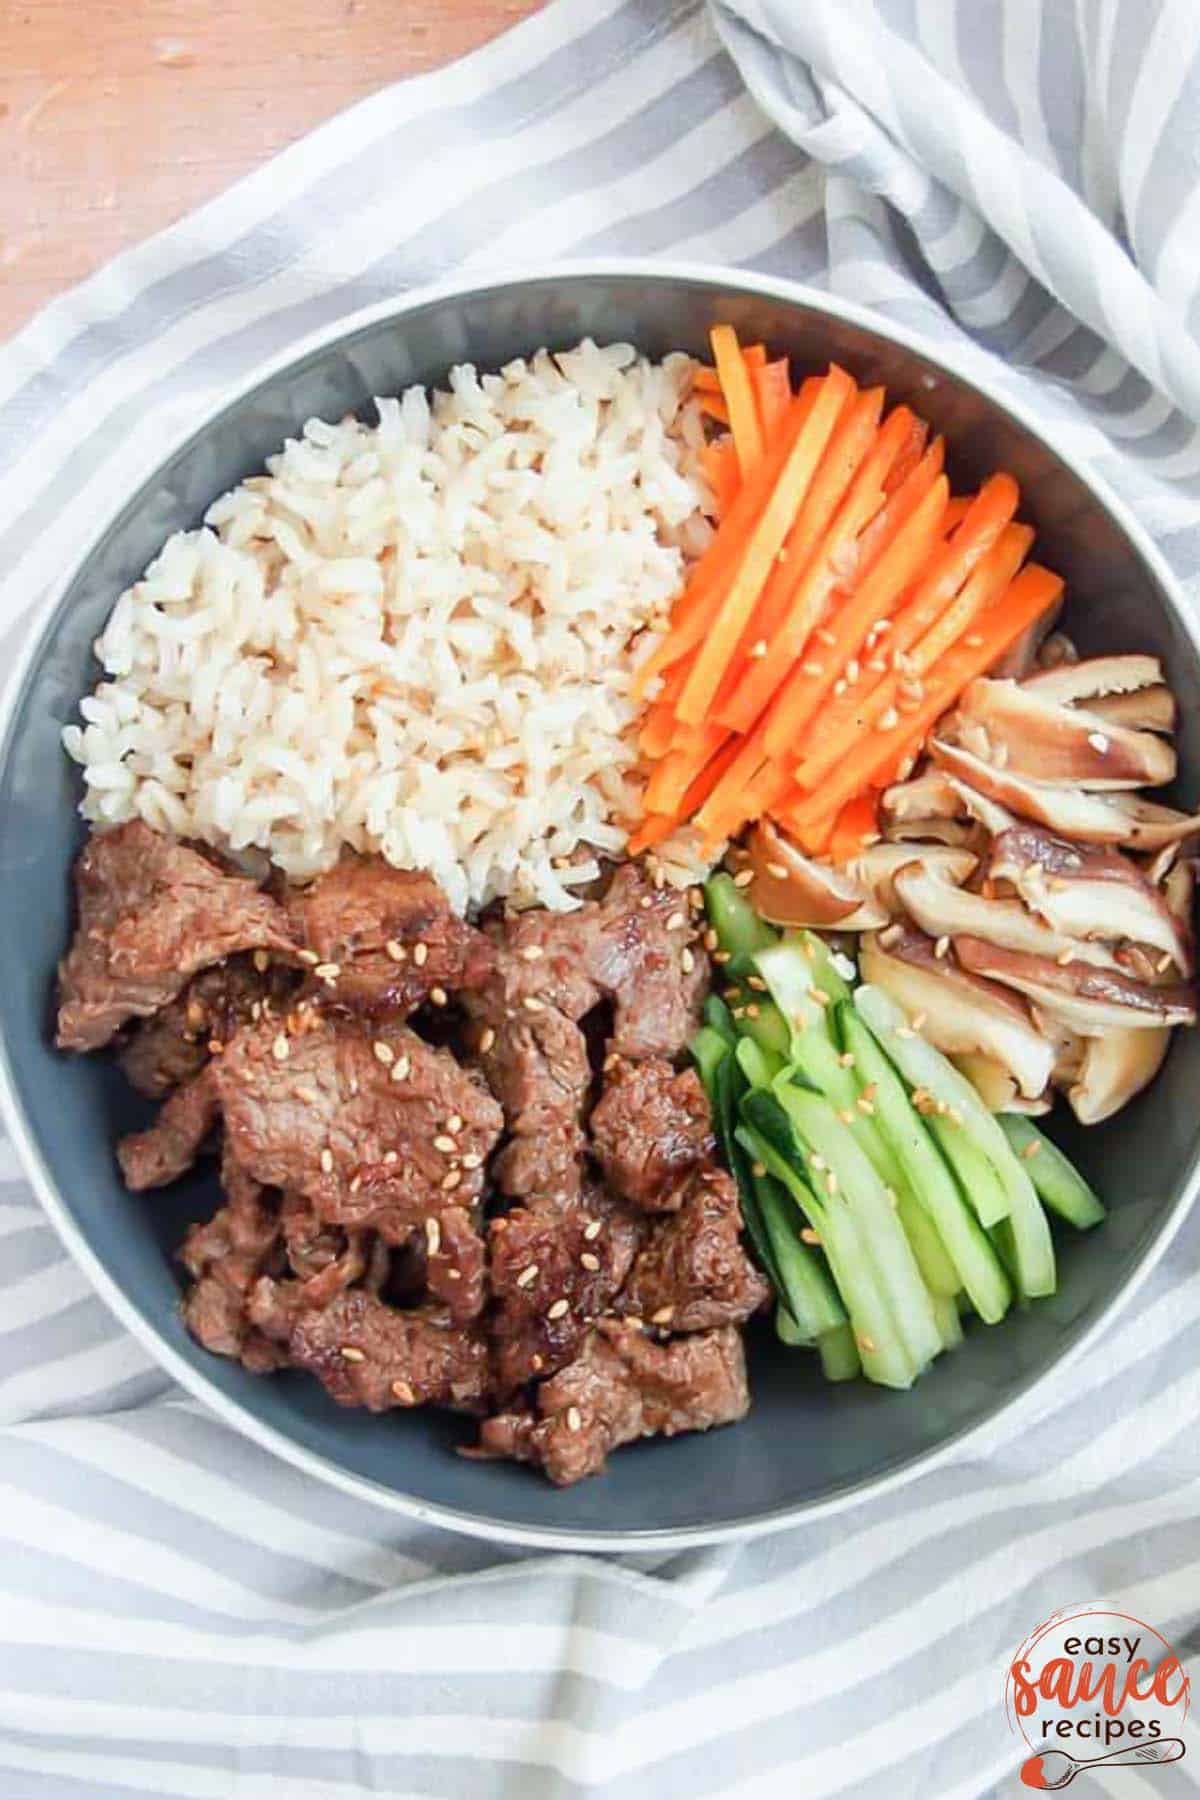 bulgogi marinated beef in a bowl with cucumbers, rice, carrots, and mushrooms